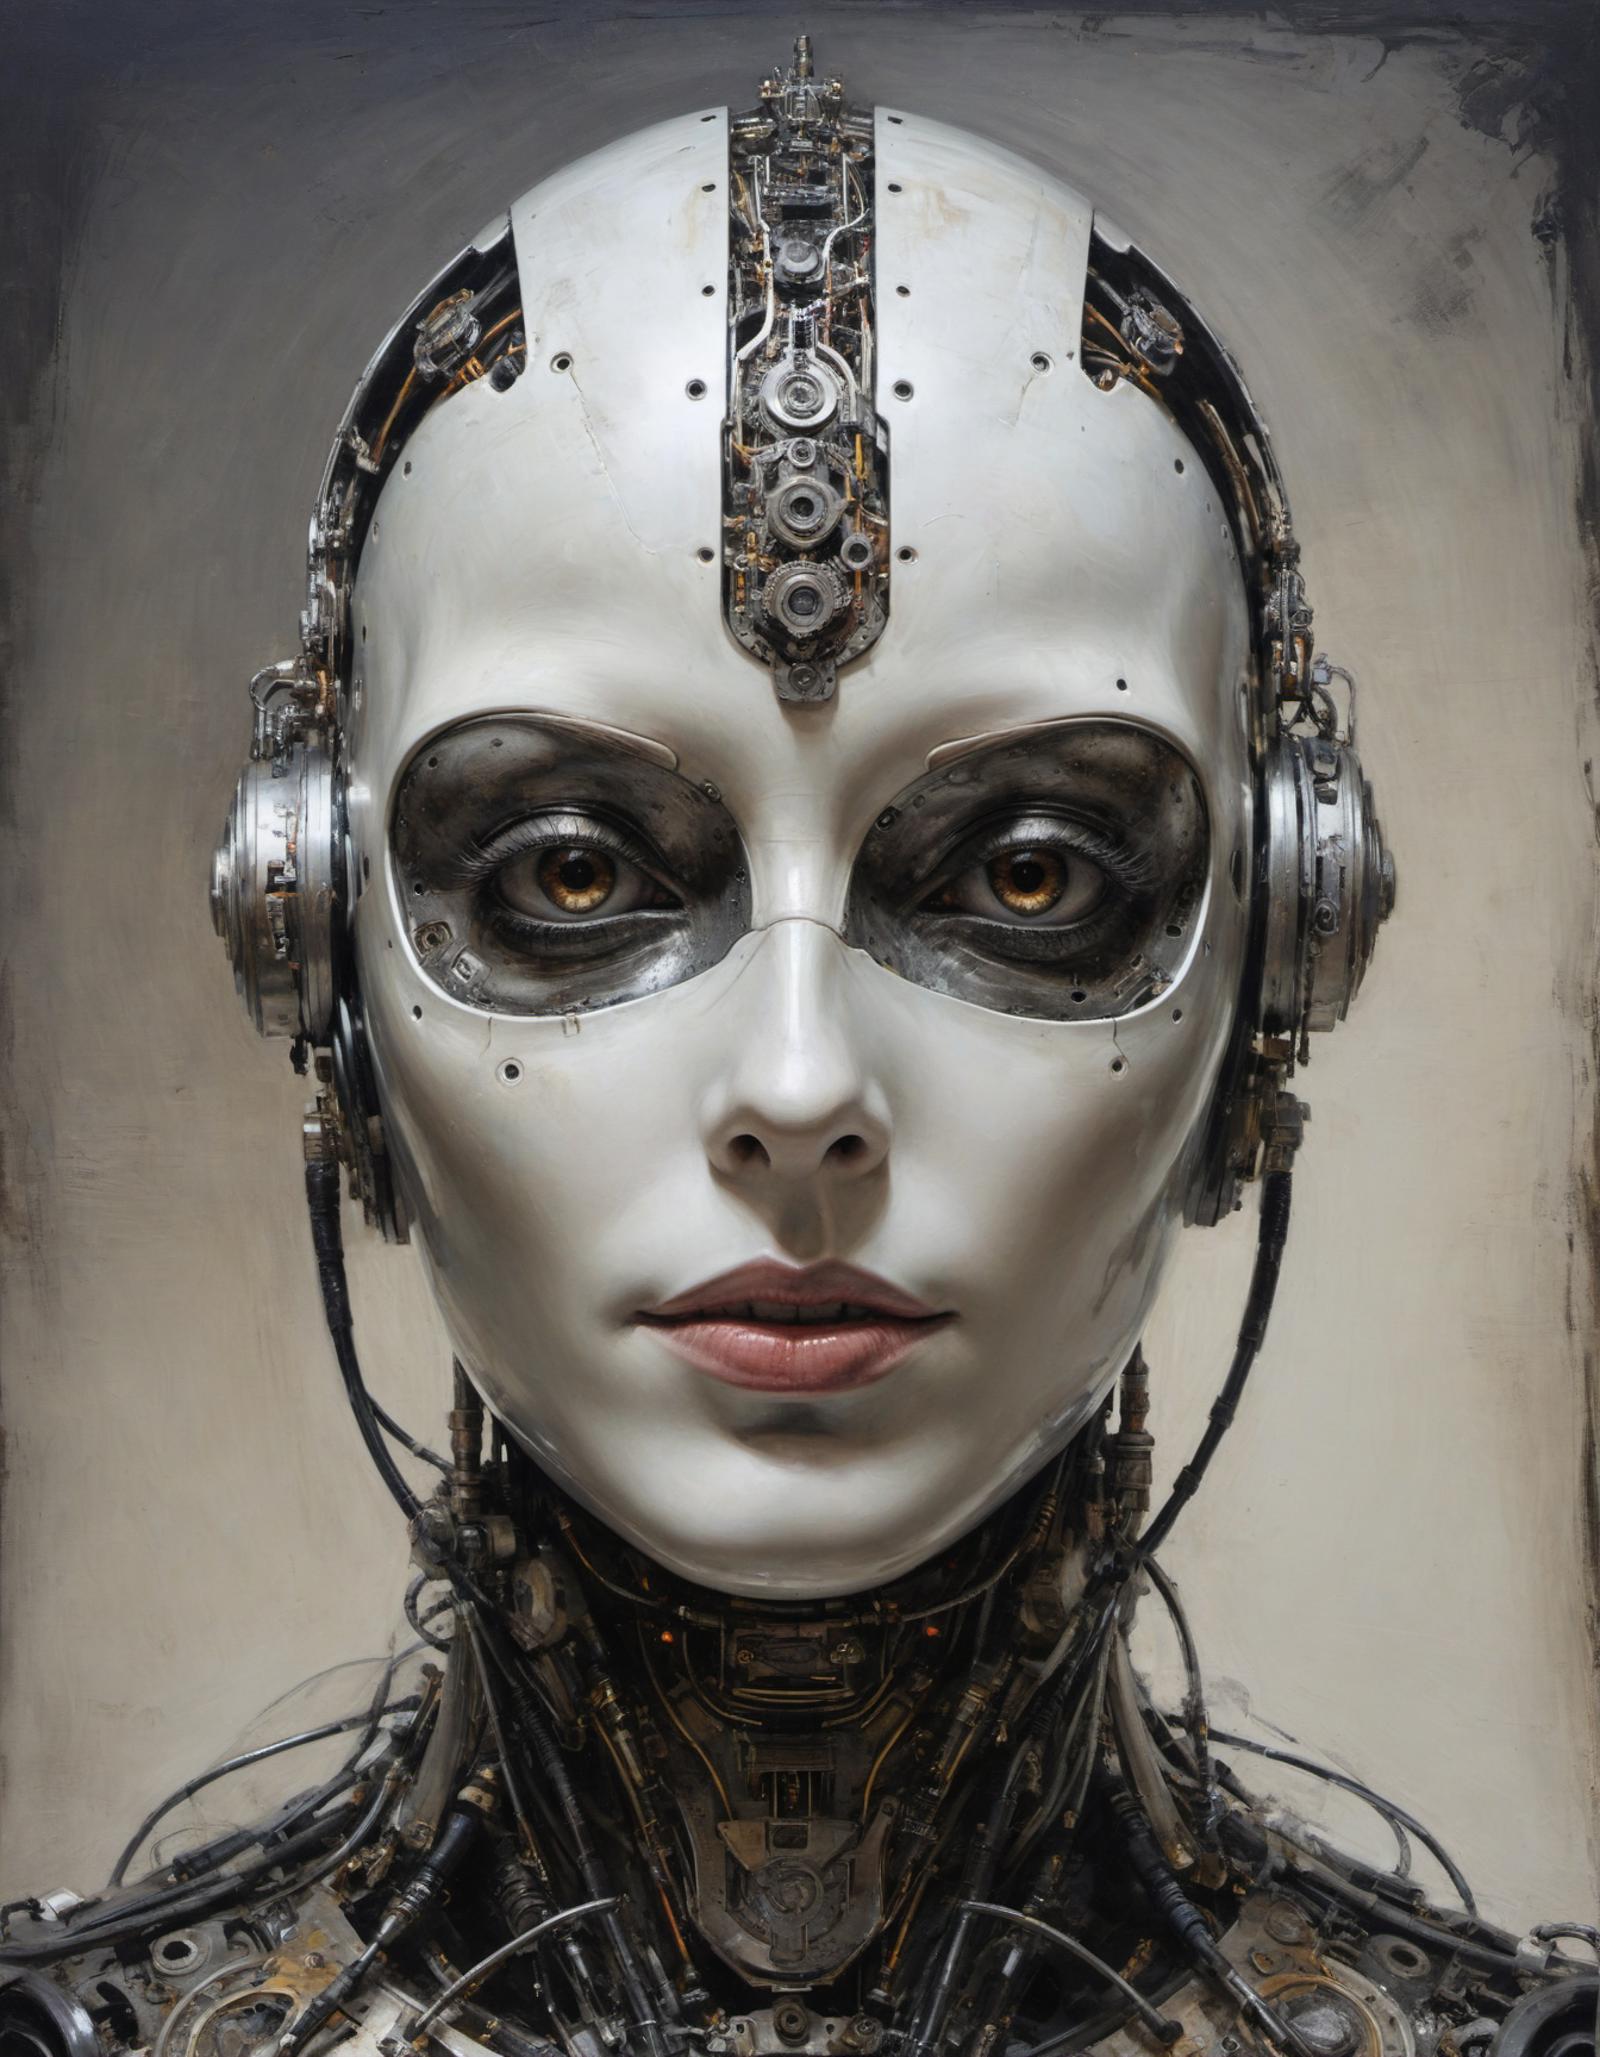 A close-up of a robotic face with metal headphones and a silver headpiece.